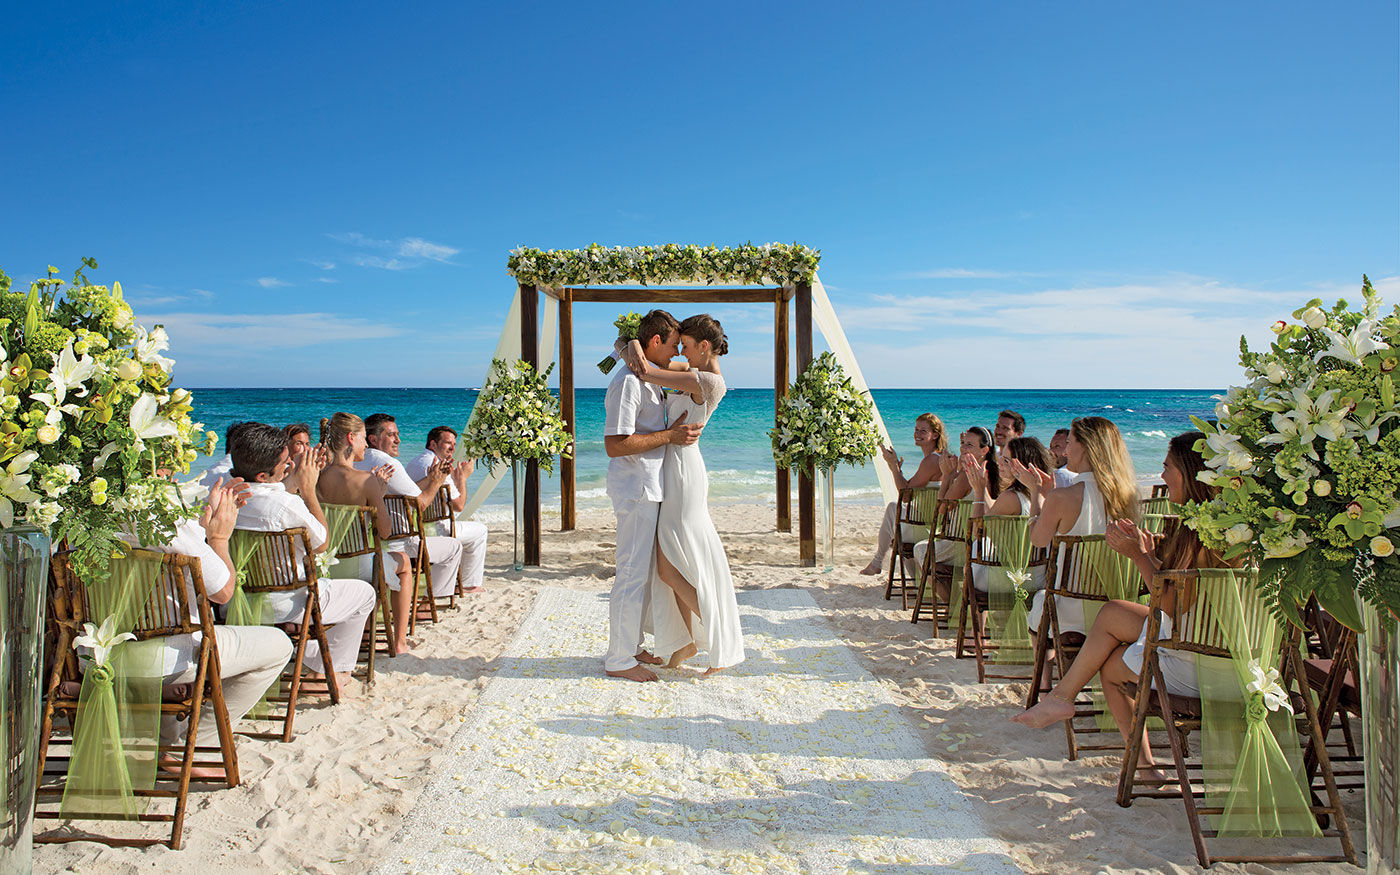 The most effective method to Plan a Budget for A Destination Wedding!